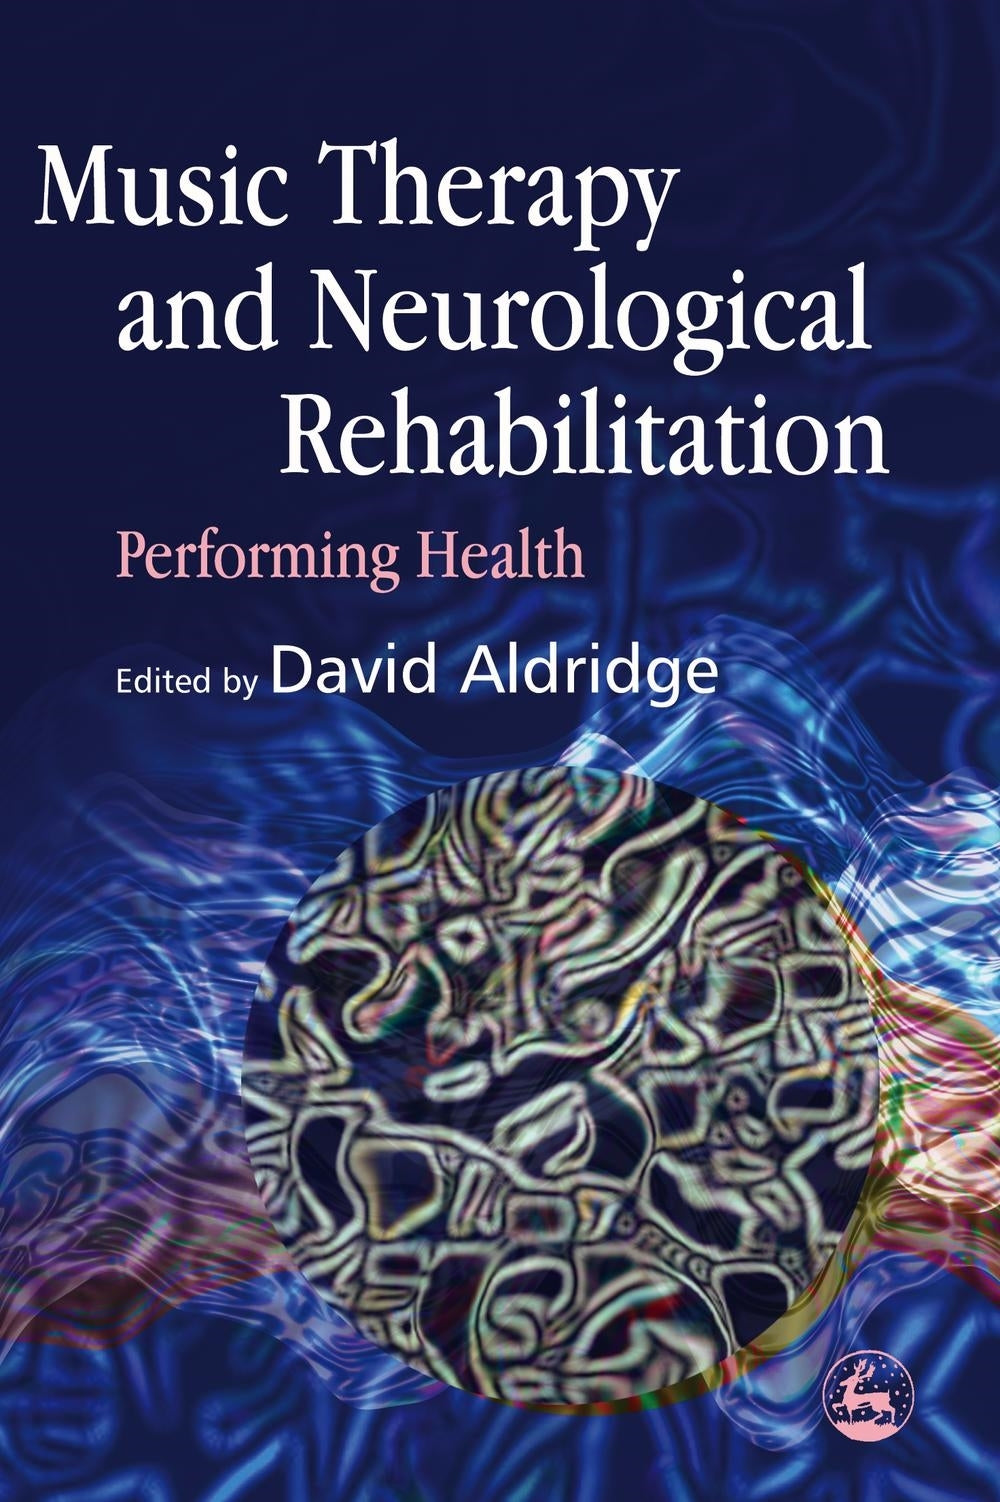 Music Therapy and Neurological Rehabilitation by No Author Listed, David Aldridge